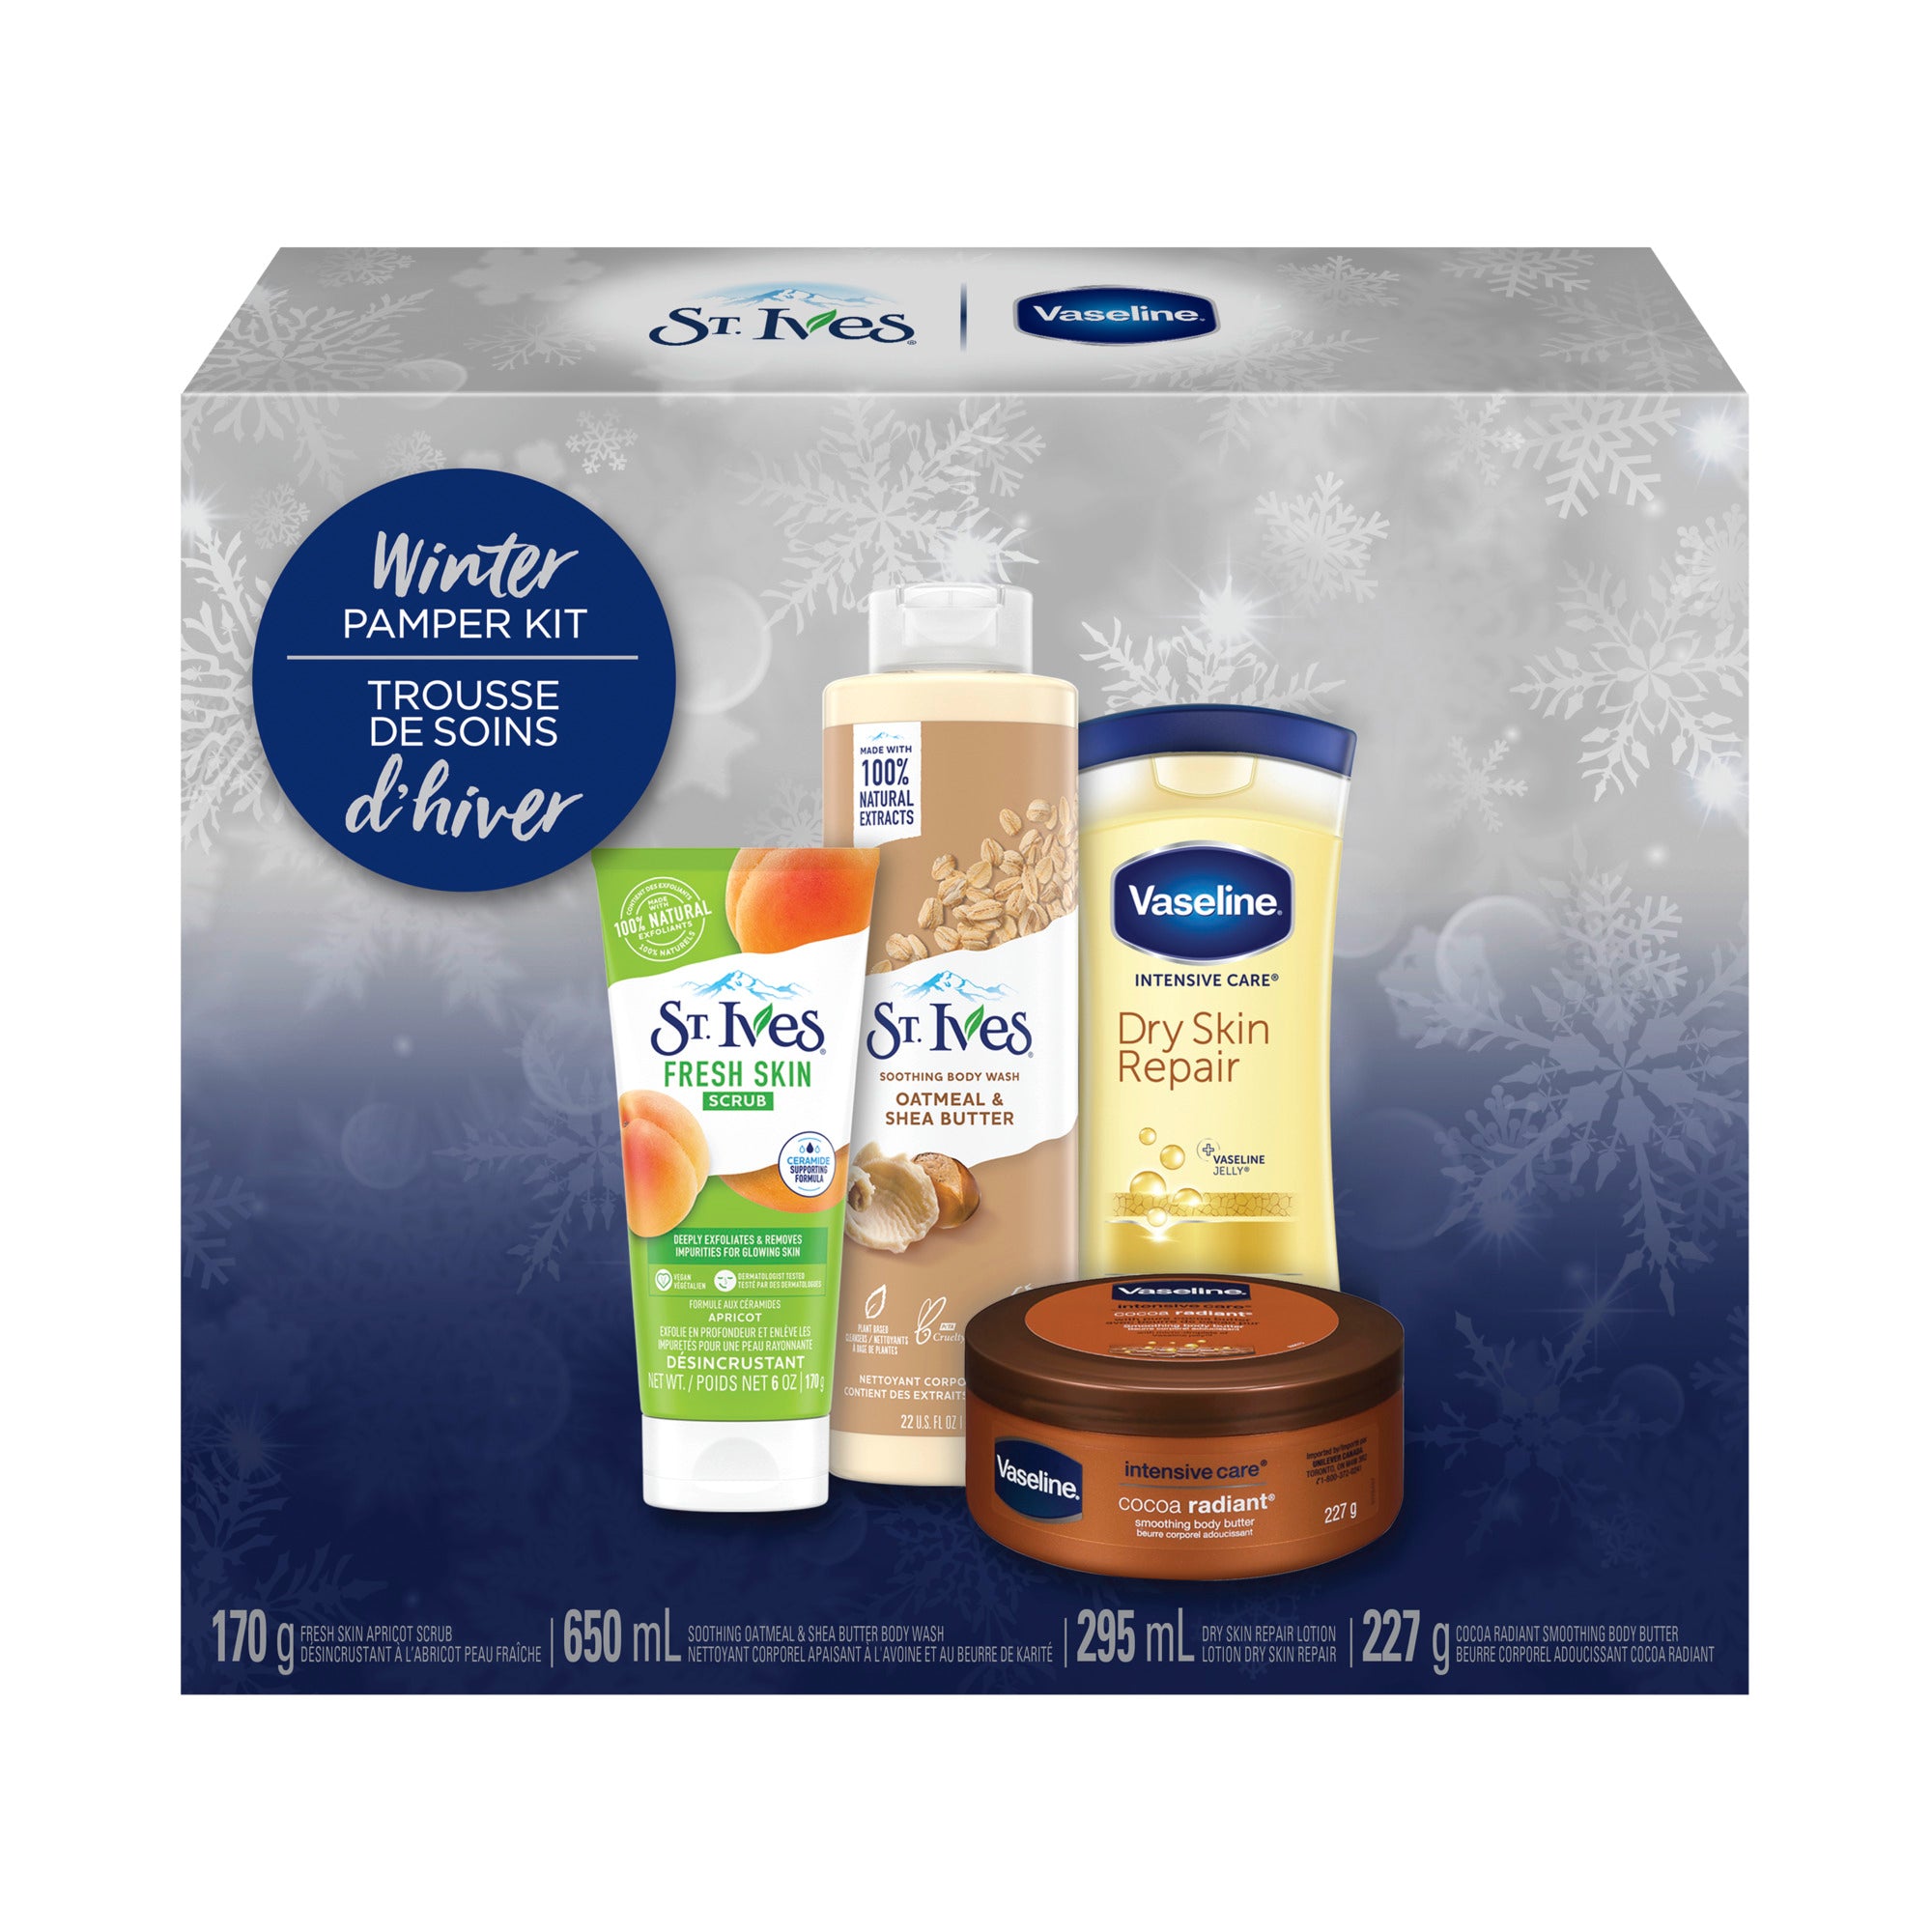 Showing the front angle view of the Vaseline & St. Ives Skincare Gift Set Winter Pamper Kit box.